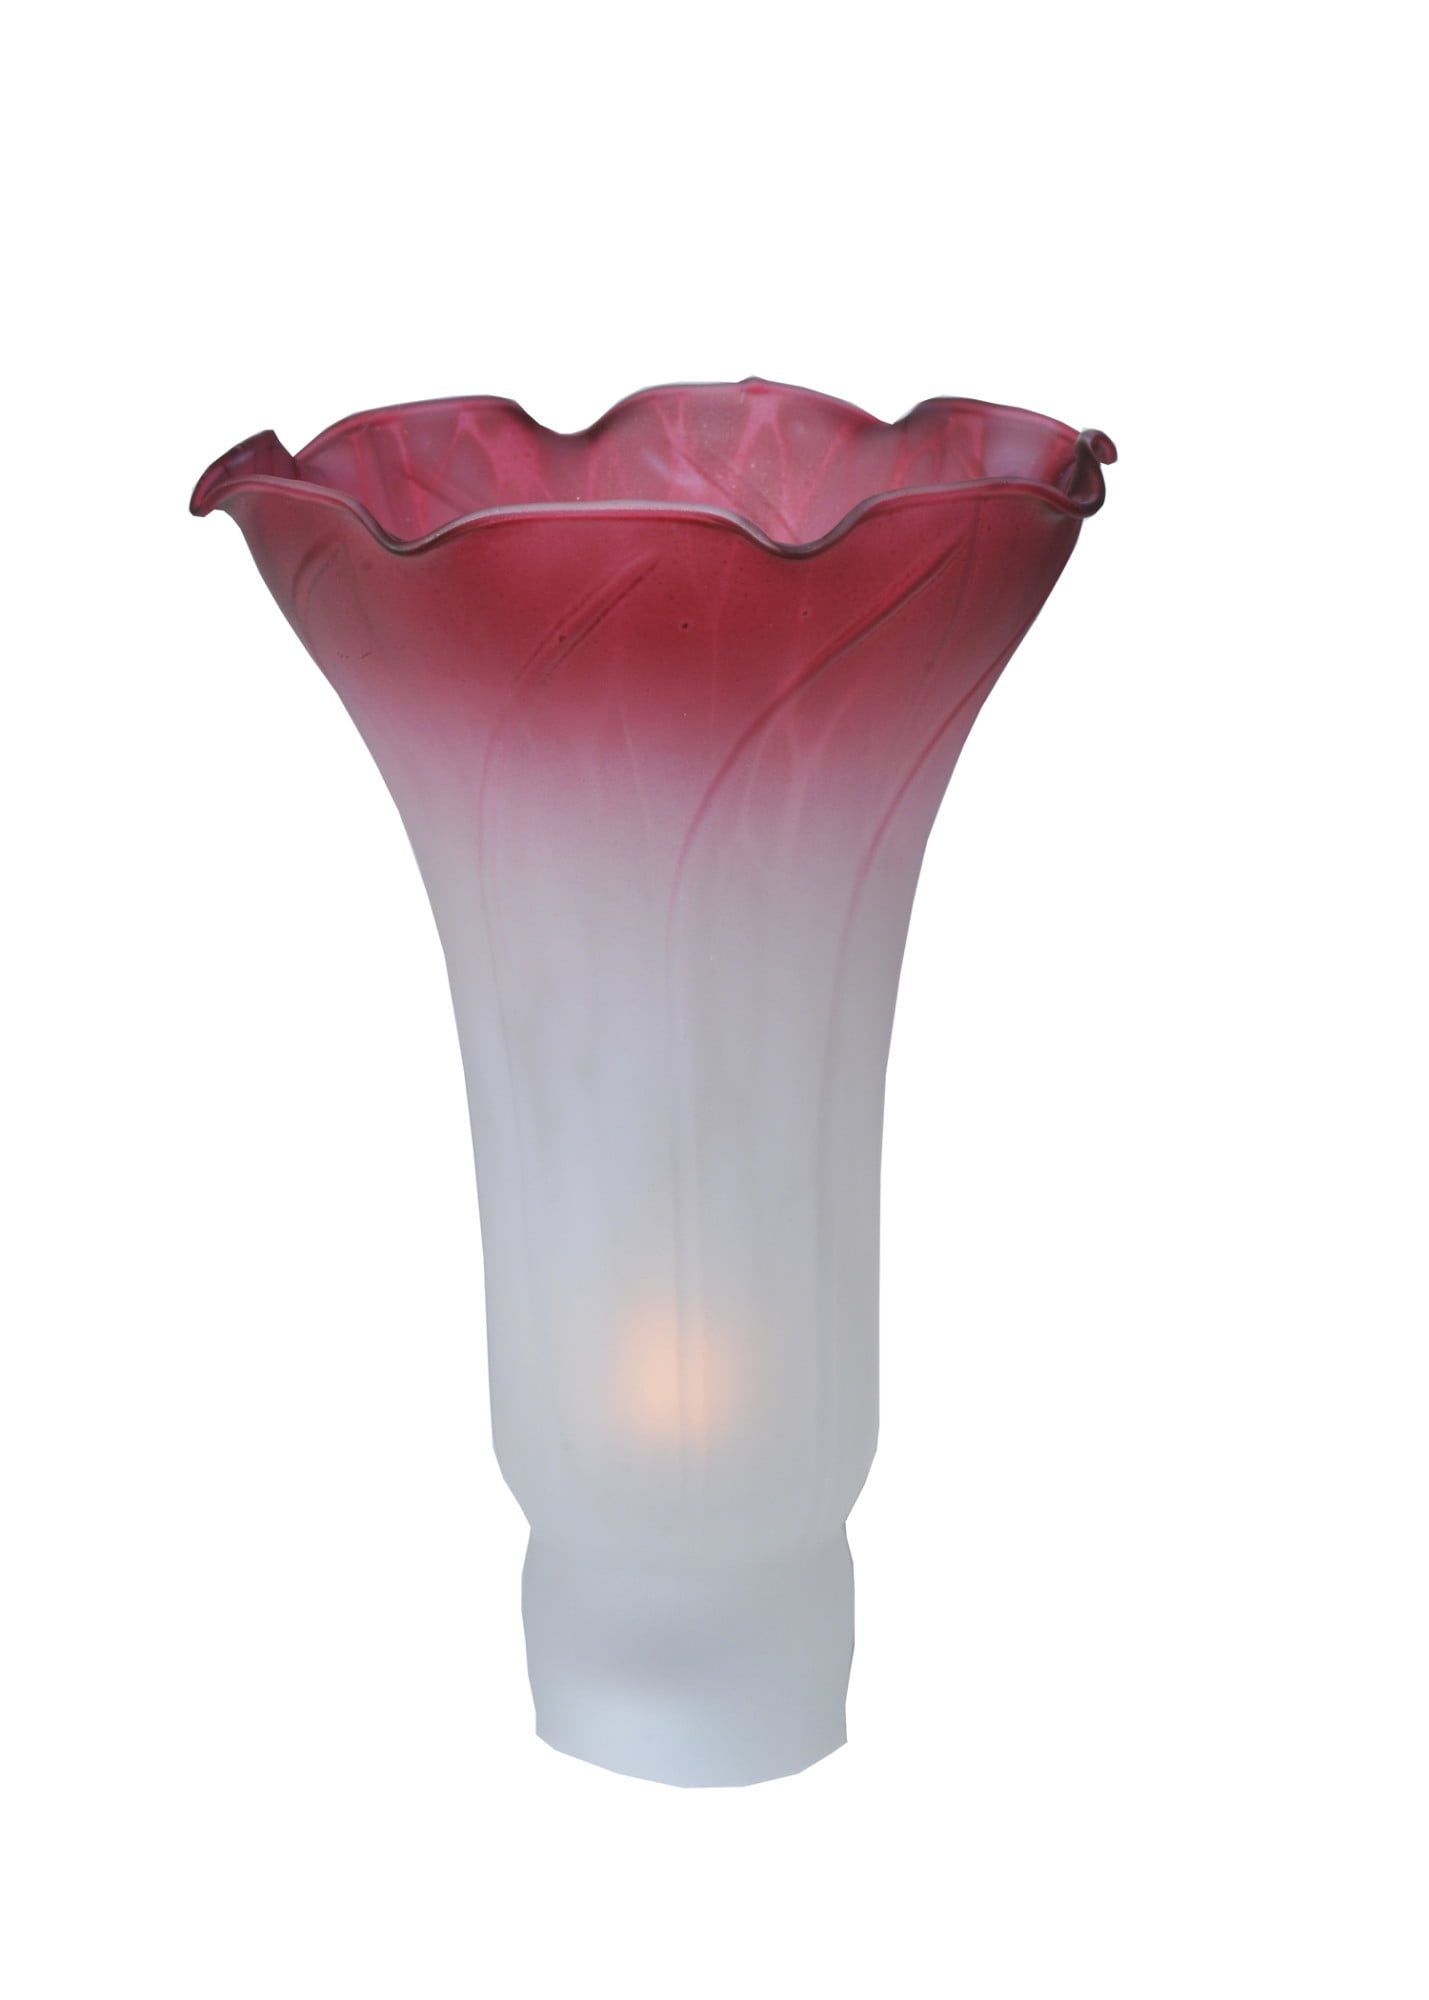 4.5"W X 6"H Pink/White Pond Lily Shade